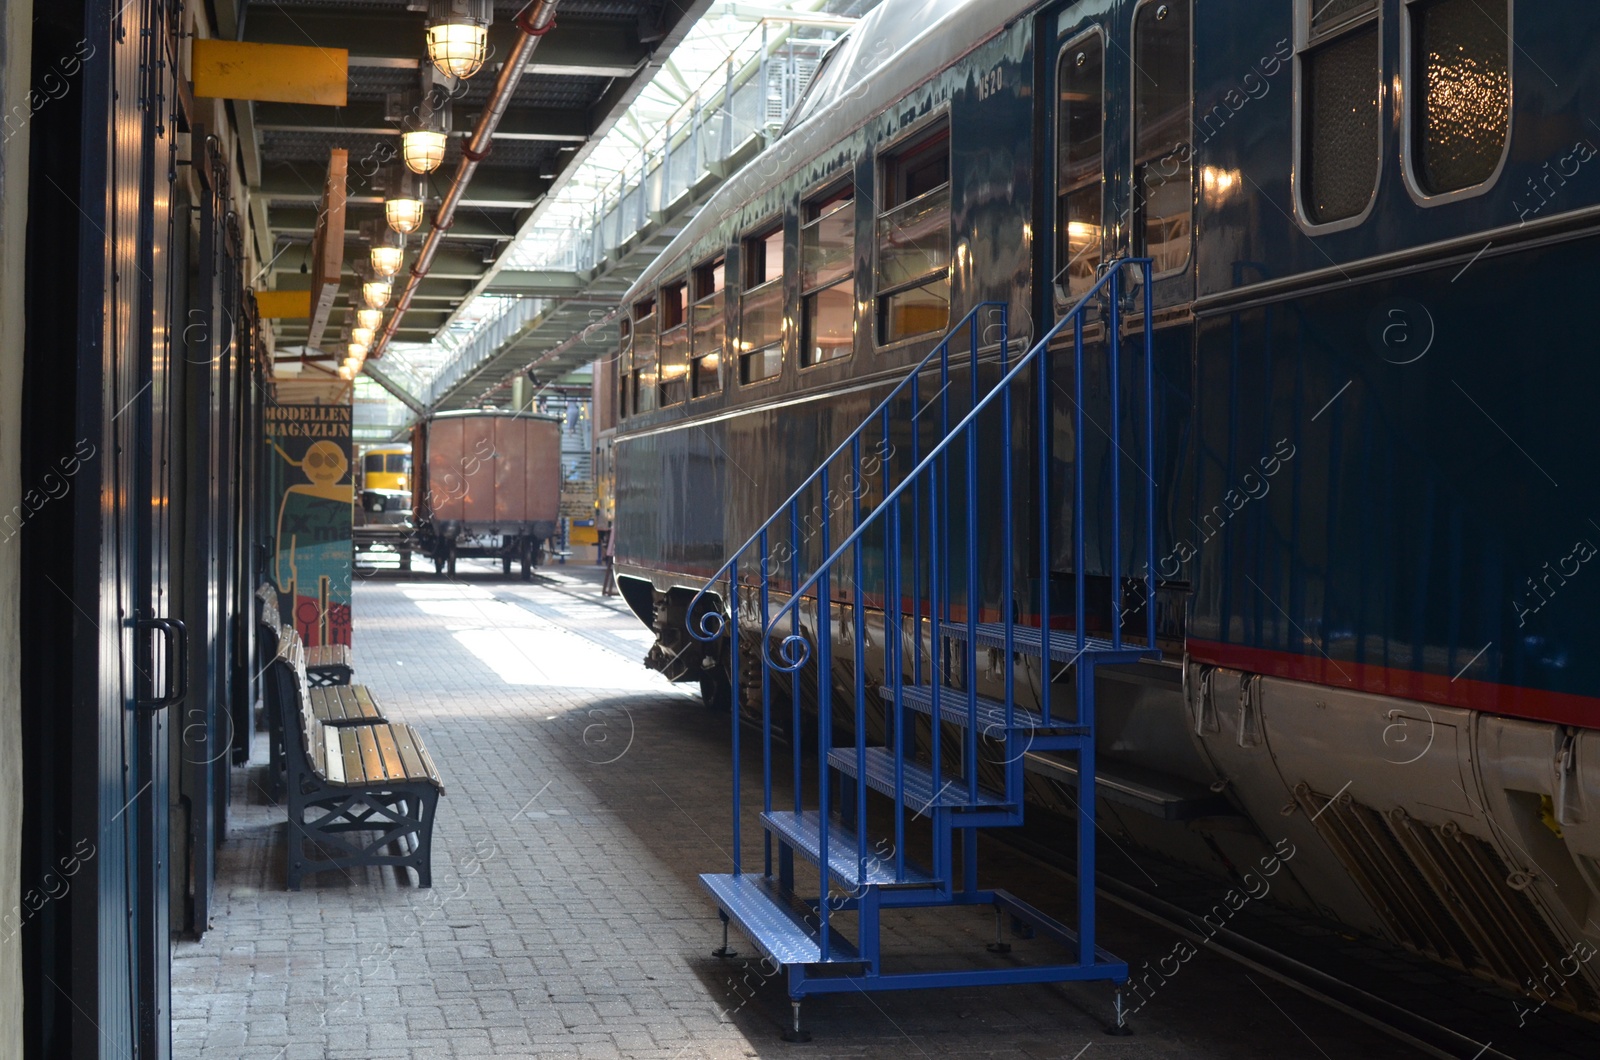 Photo of Utrecht, Netherlands - July 23, 2022: Railway station with wagons on display in Spoorwegmuseum